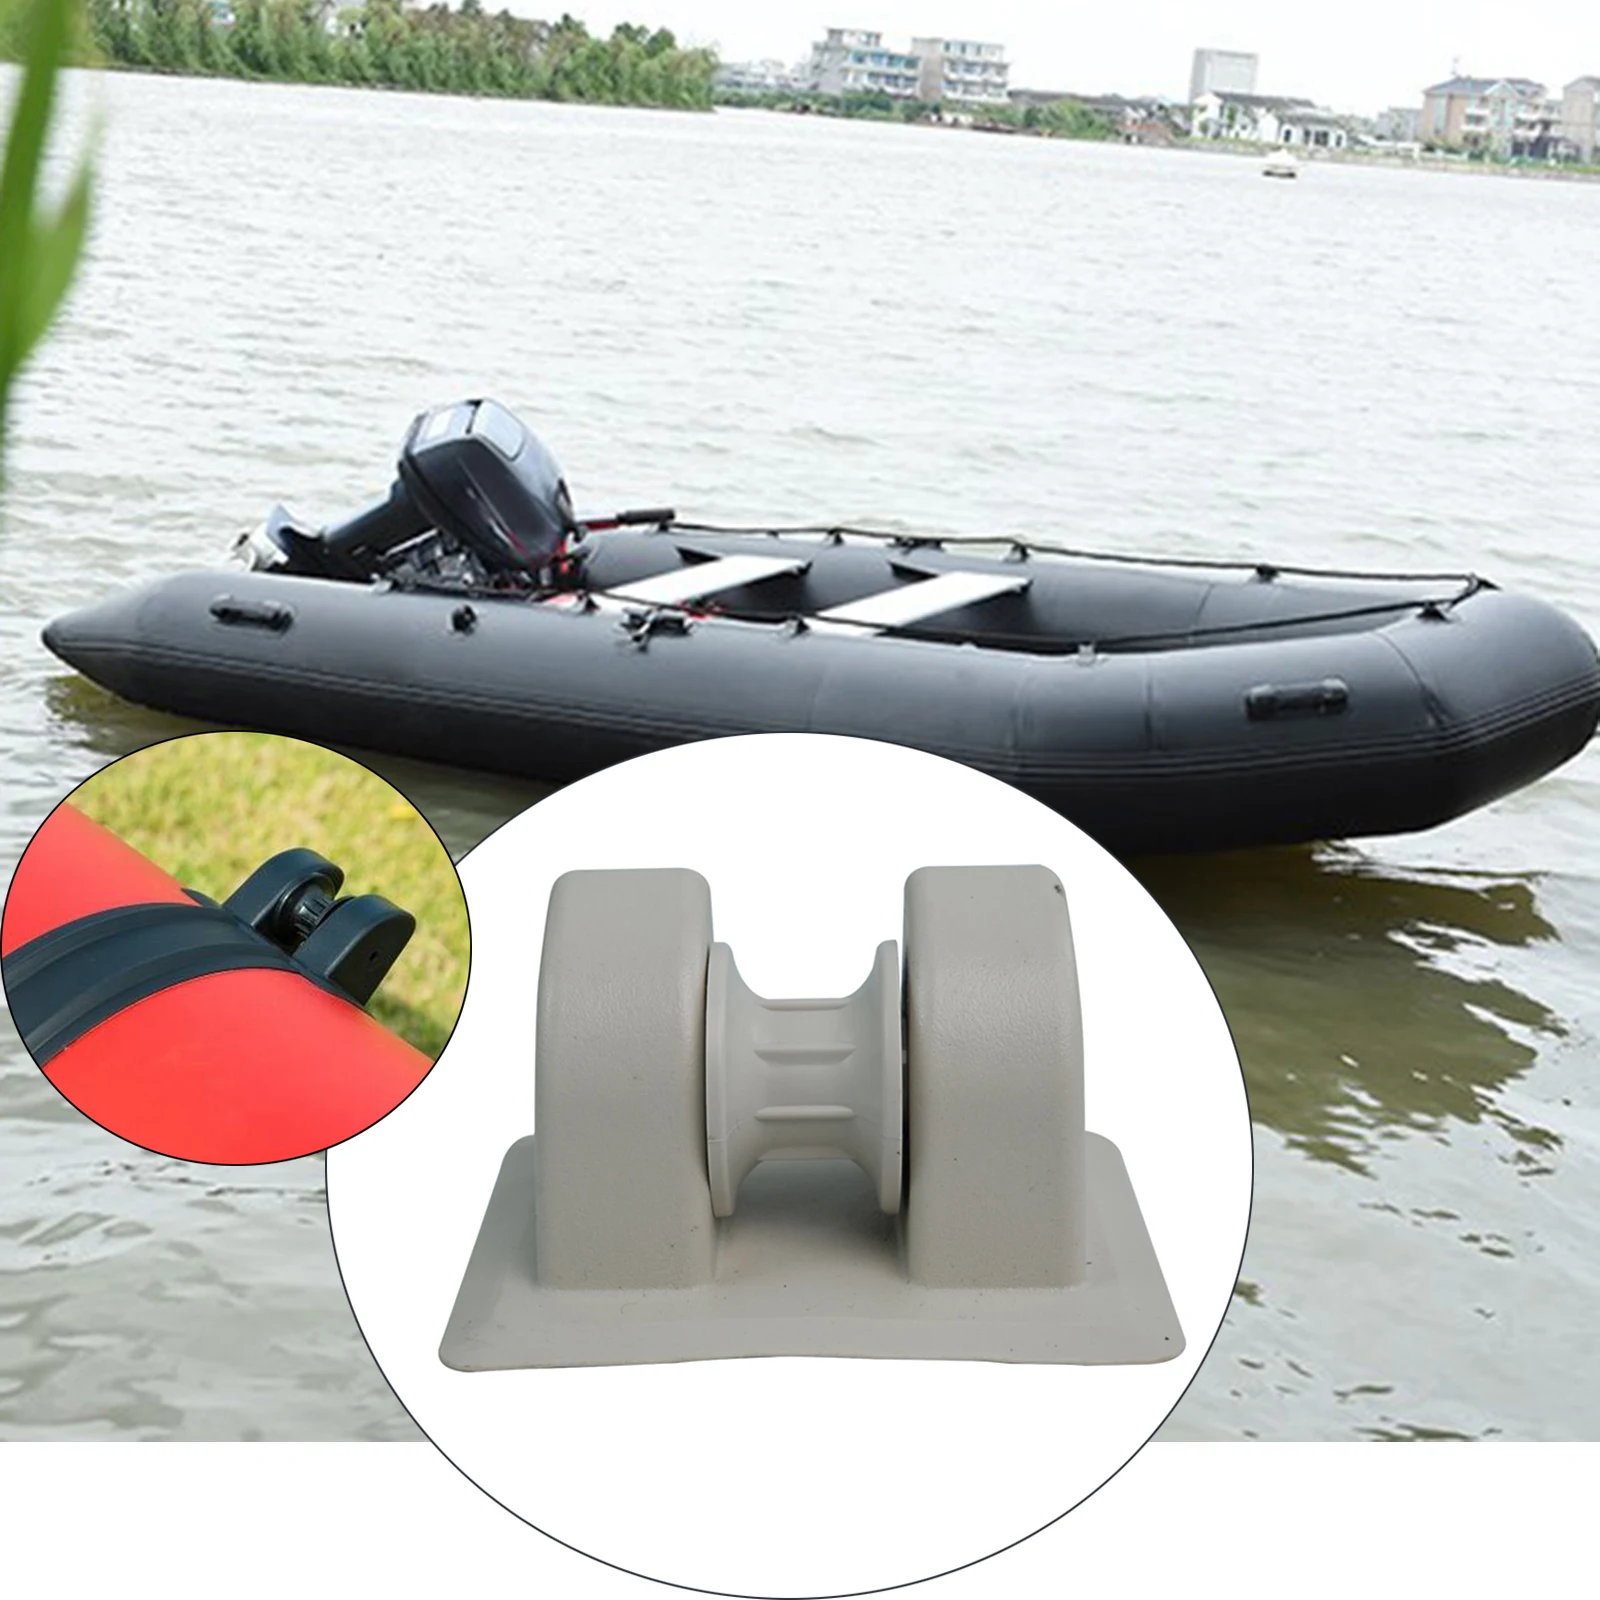 Mangobuy PVC Anchor Tie off Patch Anchor Holder Wheel Anchor Bow Roller for Boating Inflatable Boats Kayaks Dinghy 